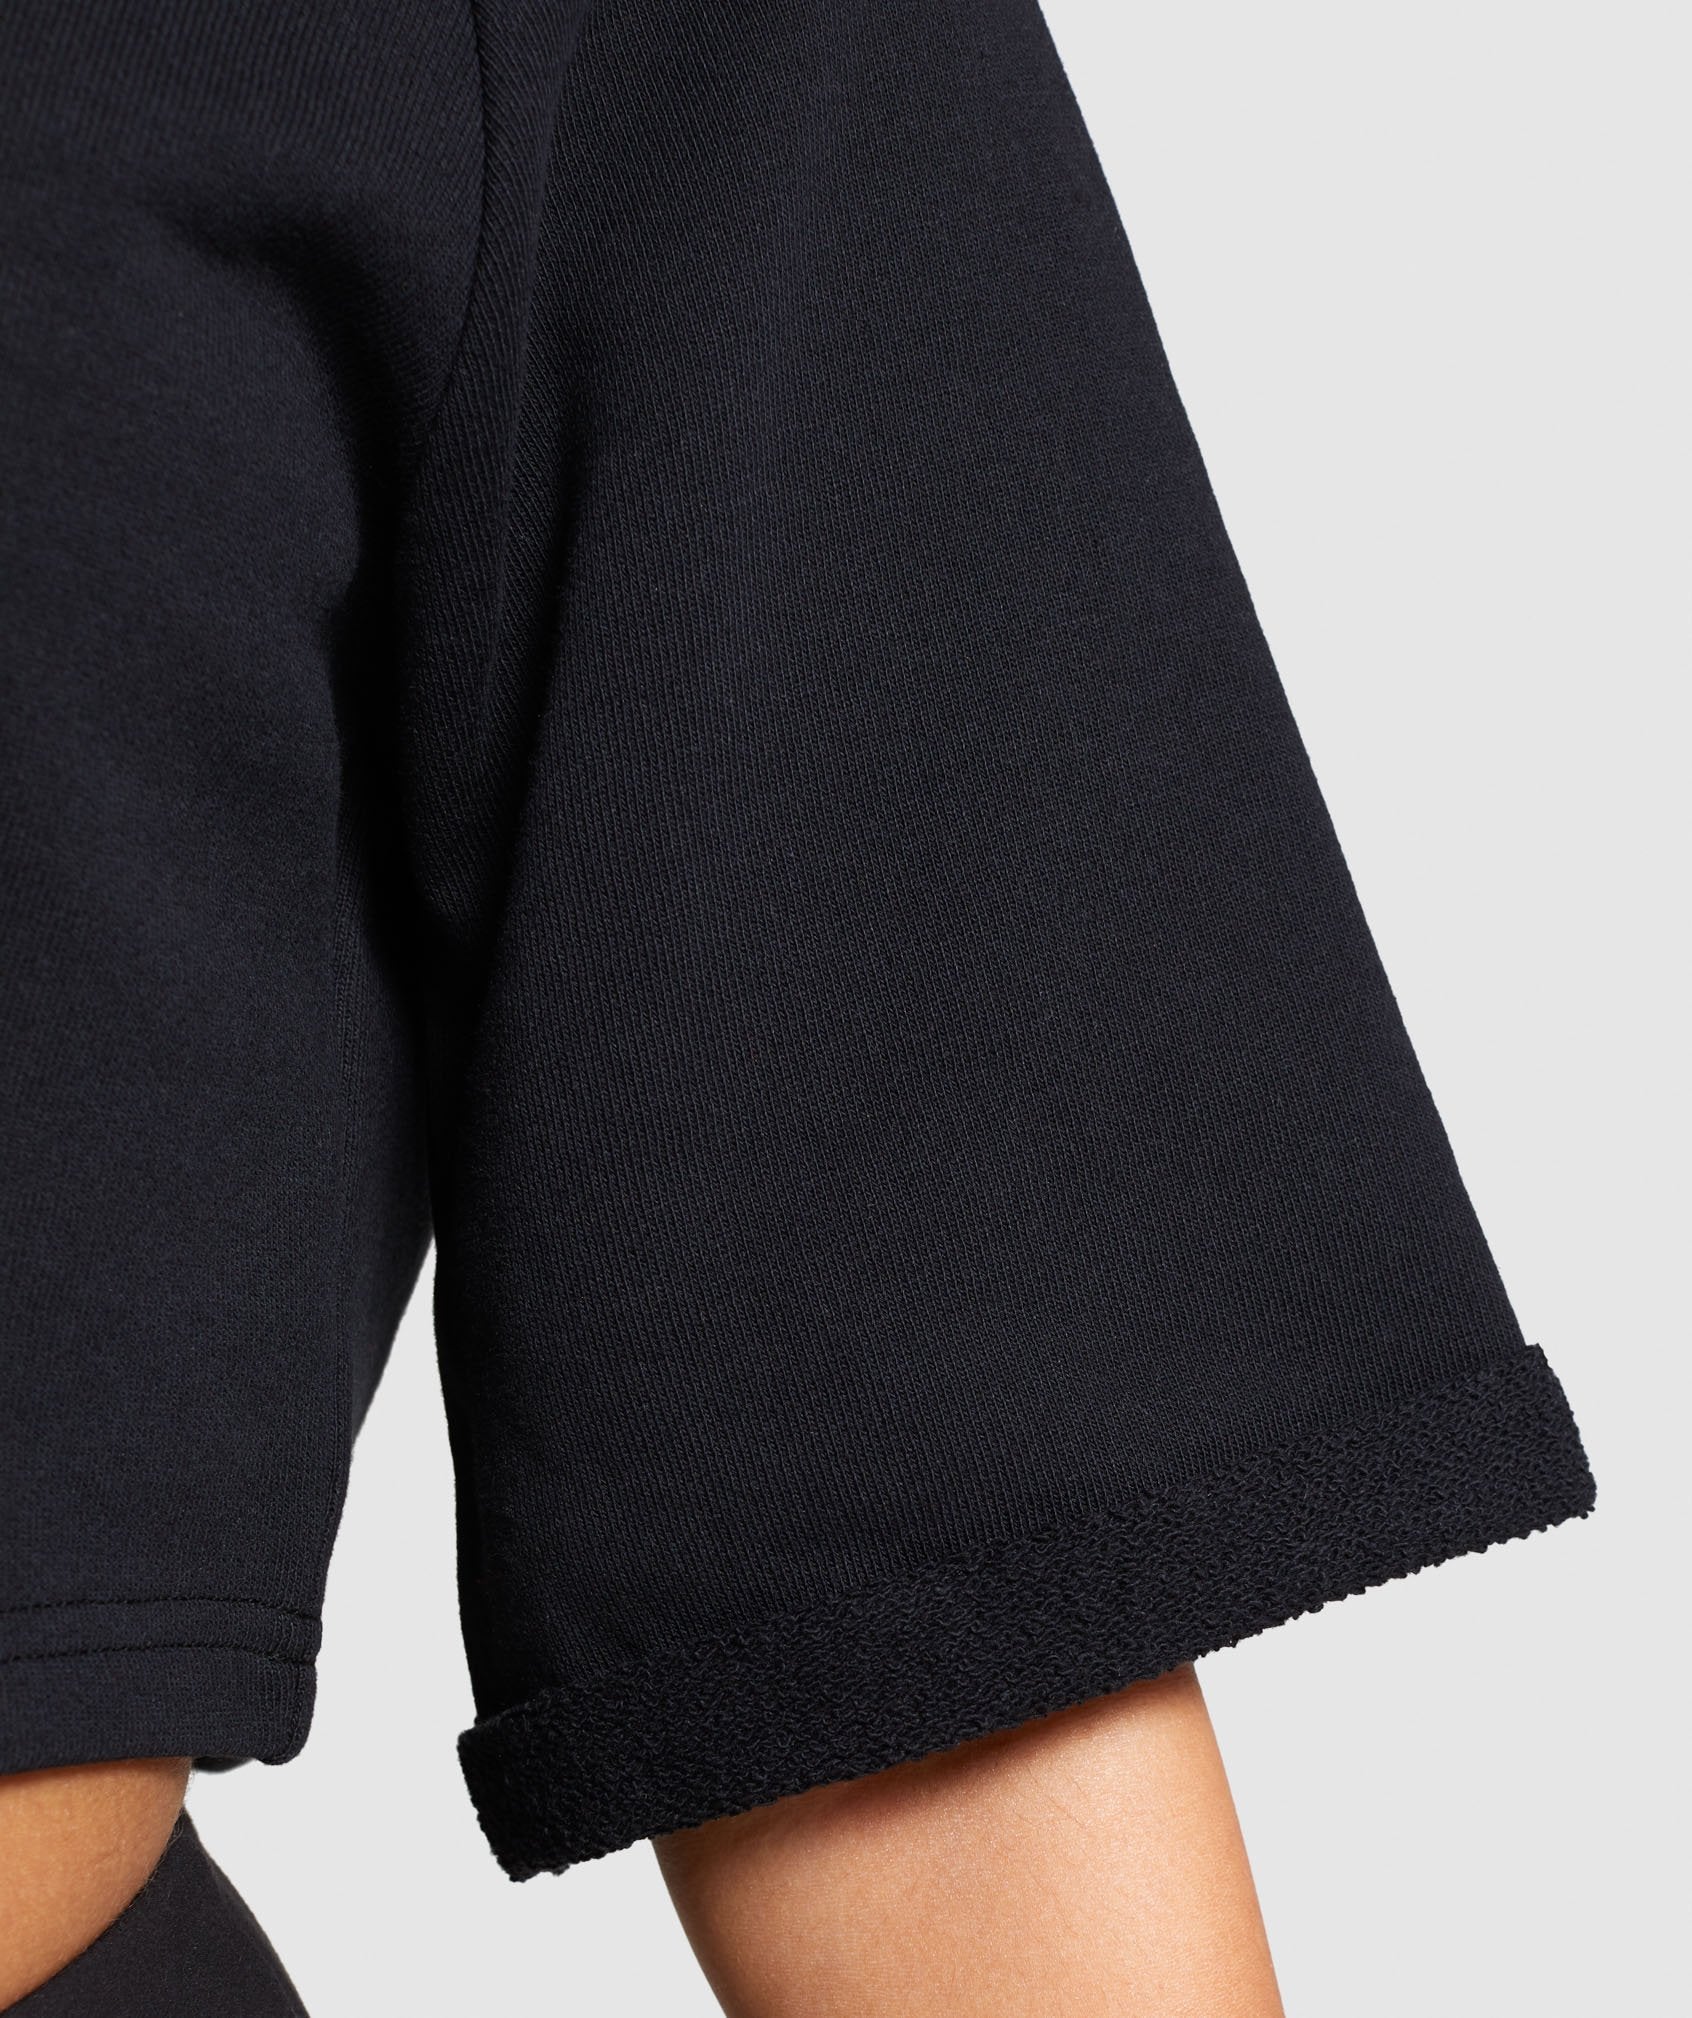 Roots Boxy Cropped Sweater in Black - view 6